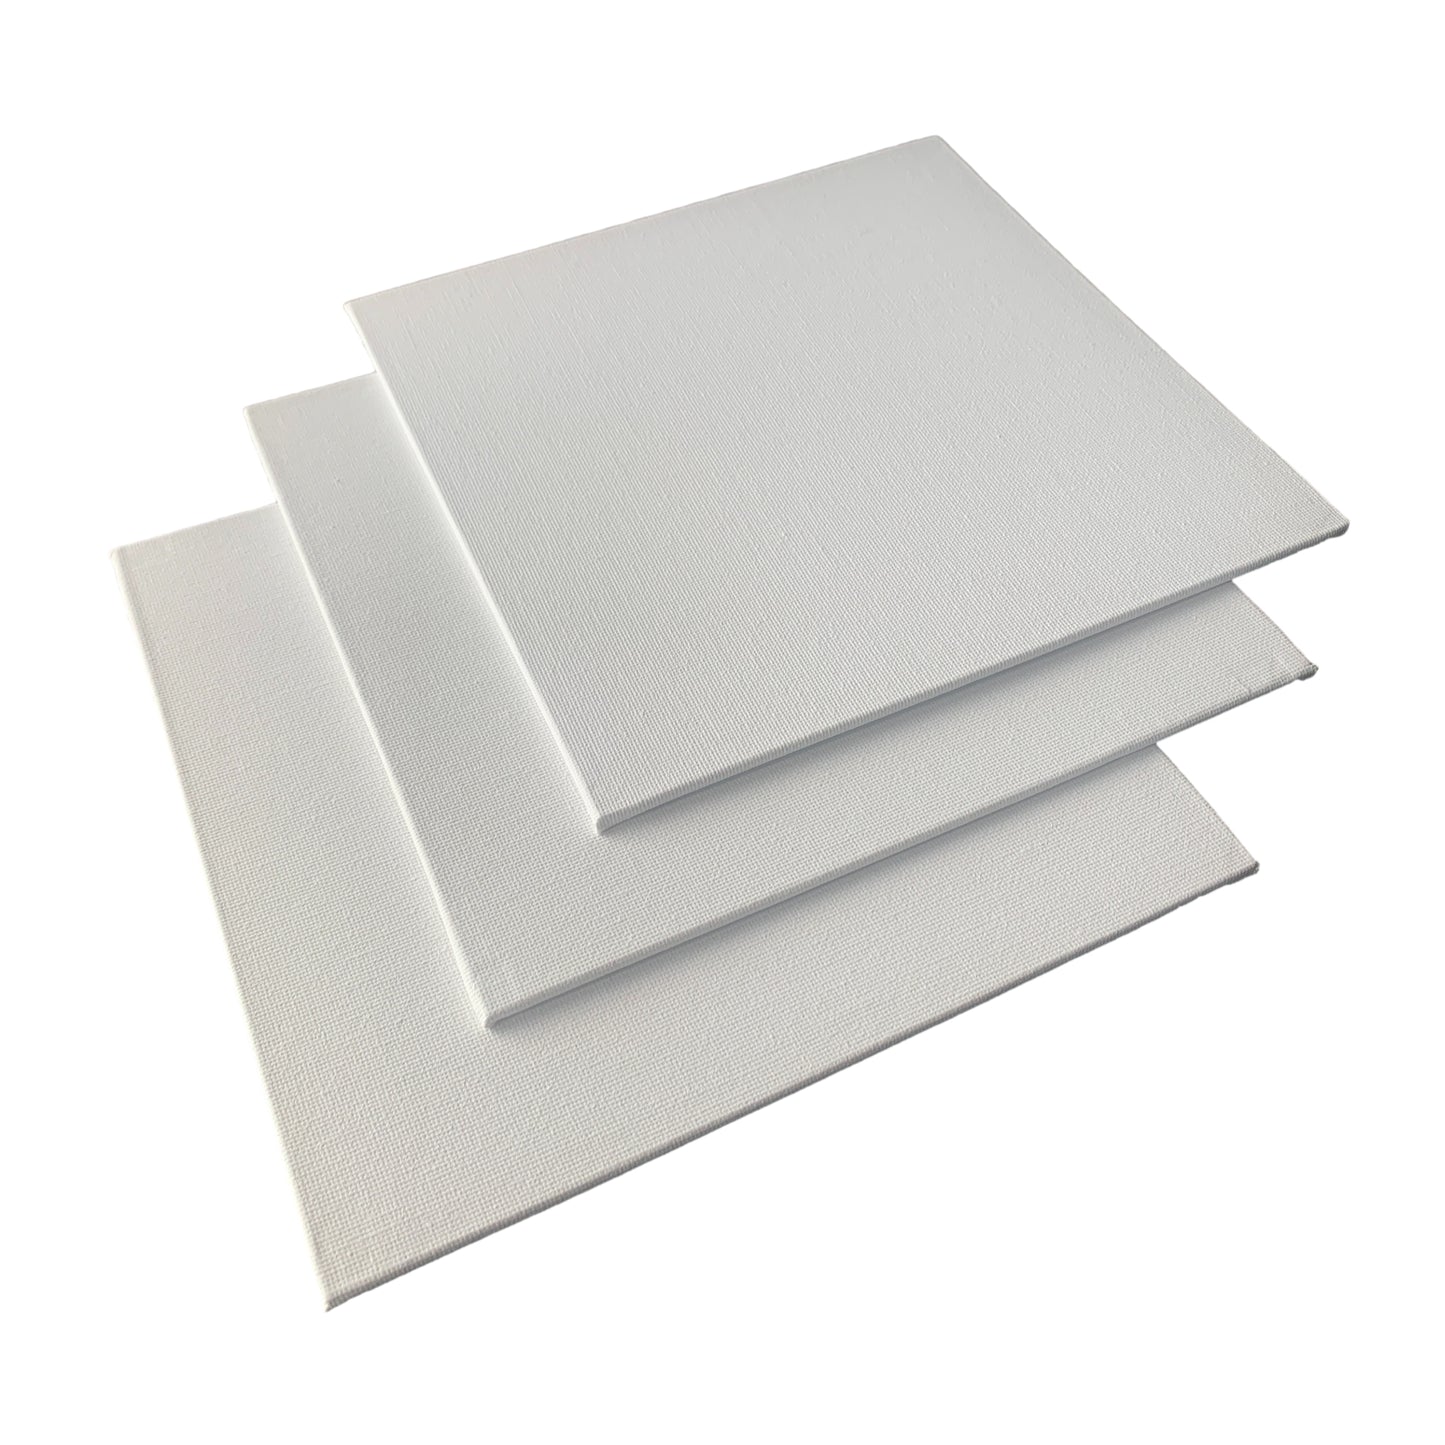 20x20cm Blank White Flat Stretched Board Art Canvas By Janrax